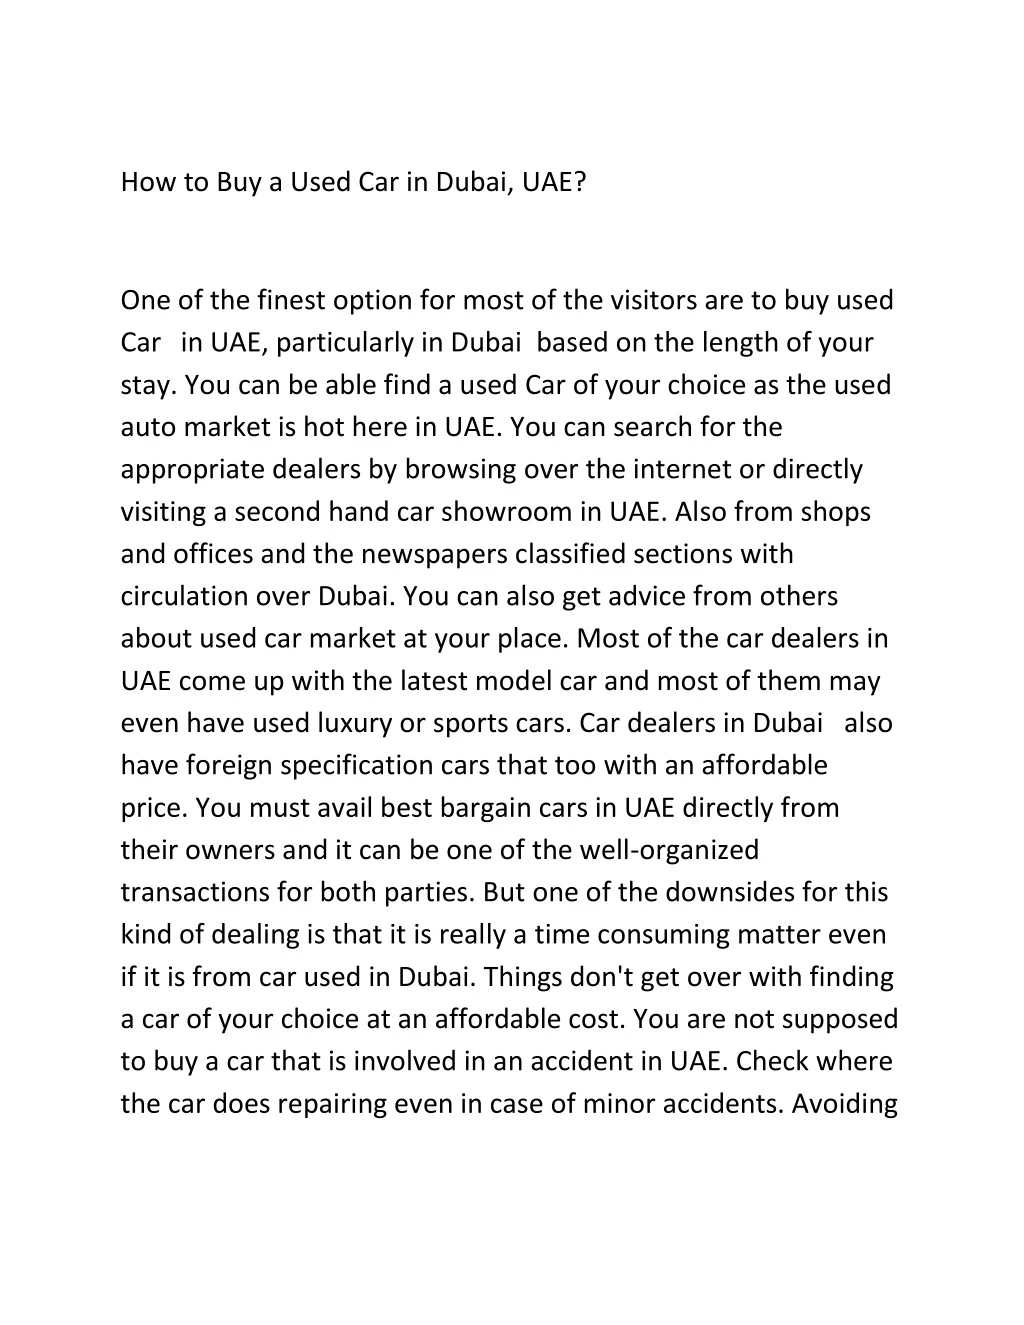 how to buy a used car in dubai uae